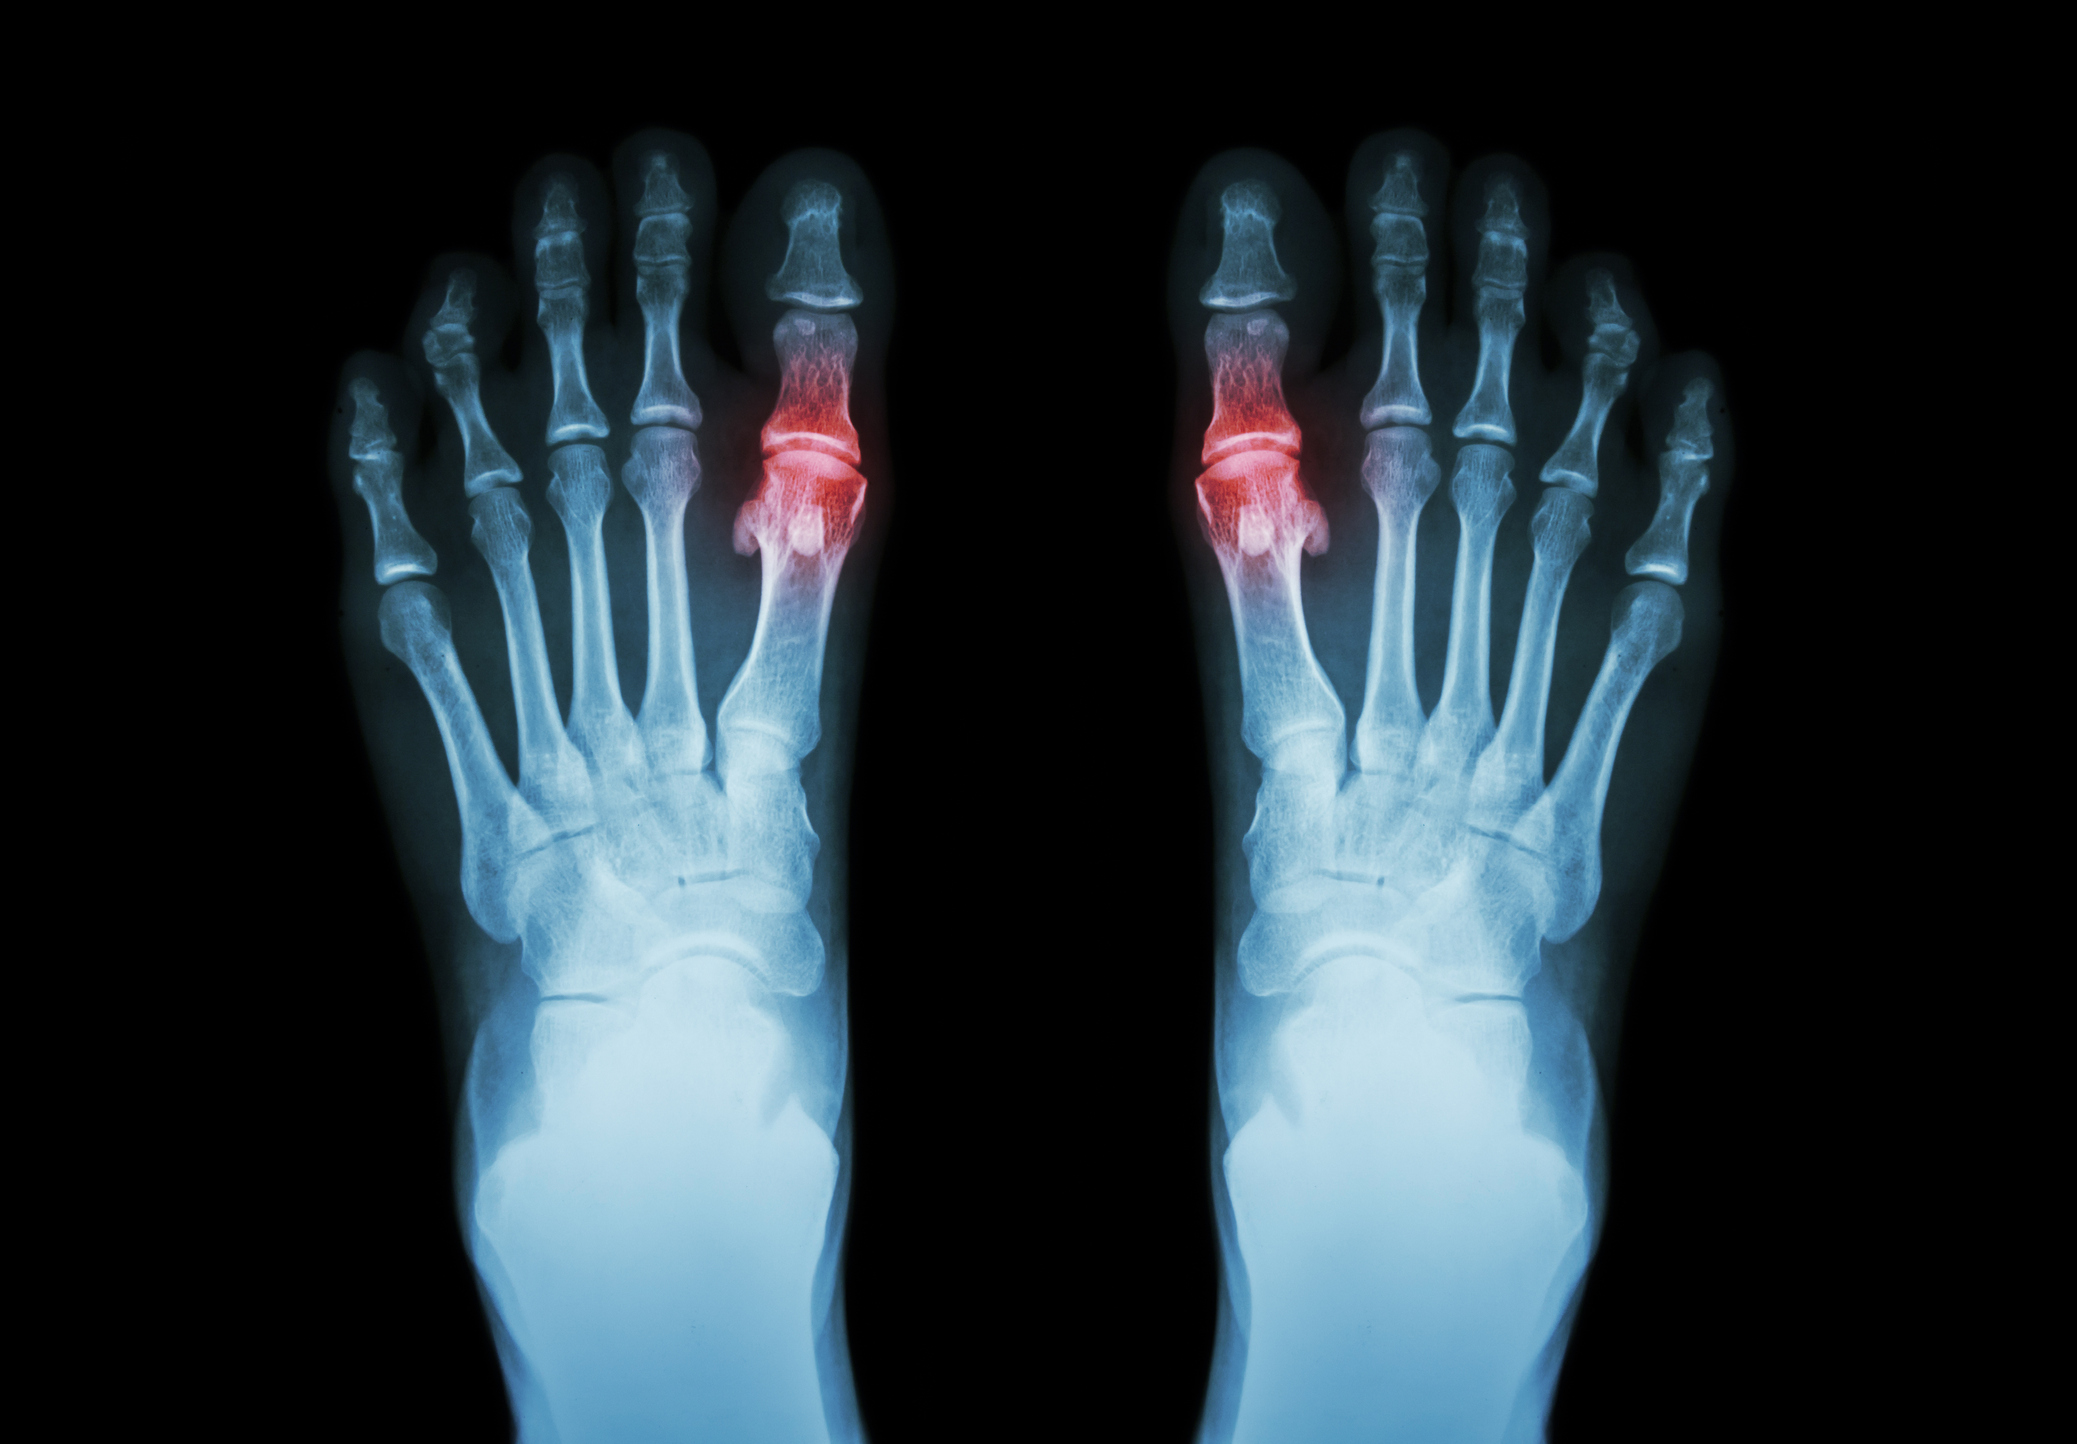 Neutrophil-to-Lymphocyte Ratio in Gout Suggests Sustained Post-Flare Inflammation